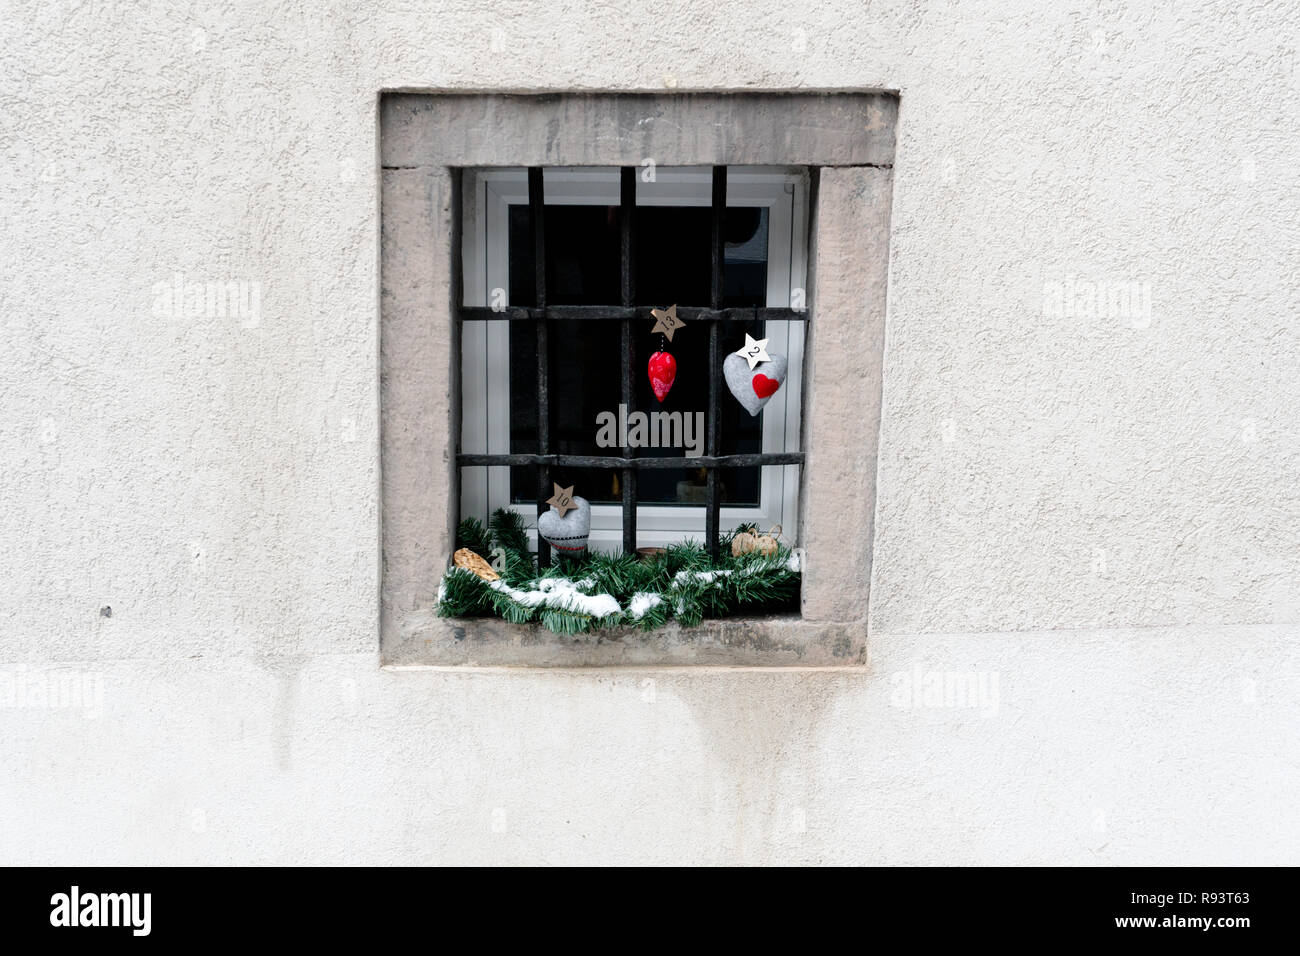 imaginative advent calendar and Christmas decorations hanging from a ground floor window in a snowy village in the Swiss Alps during the holidays Stock Photo